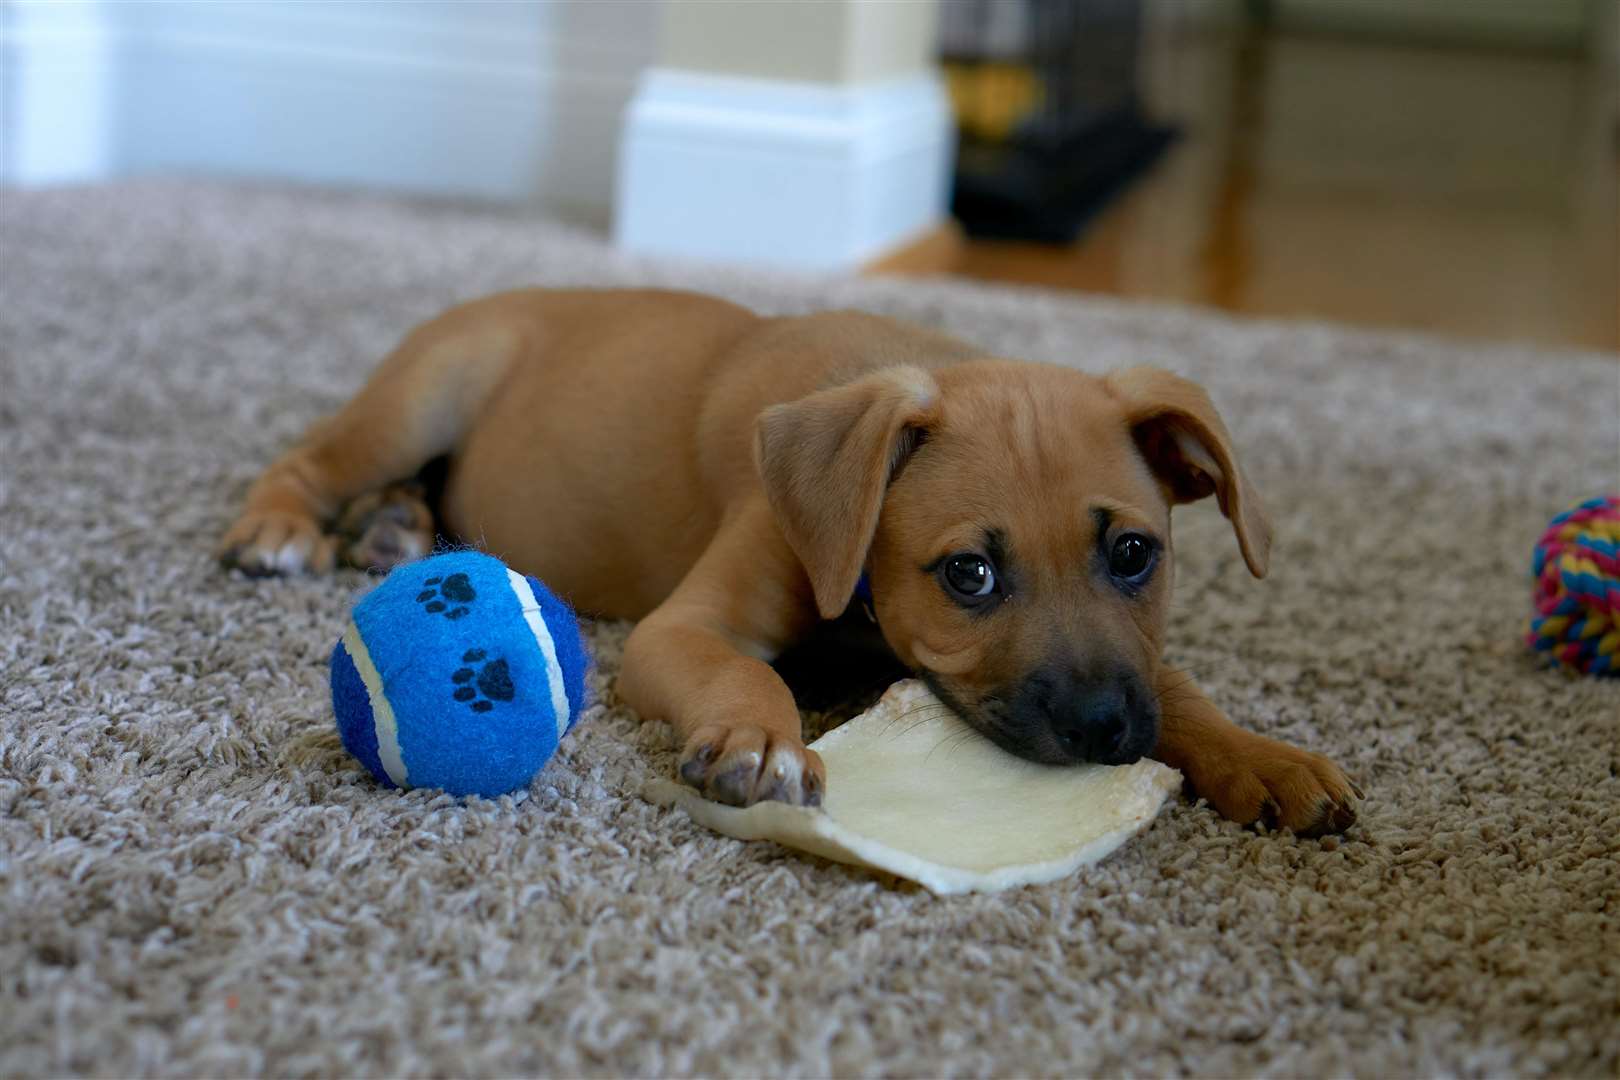 Lickimats and dog puzzles are great options to keep your pup busy. Photo: Edge2Edge Media/Unsplash